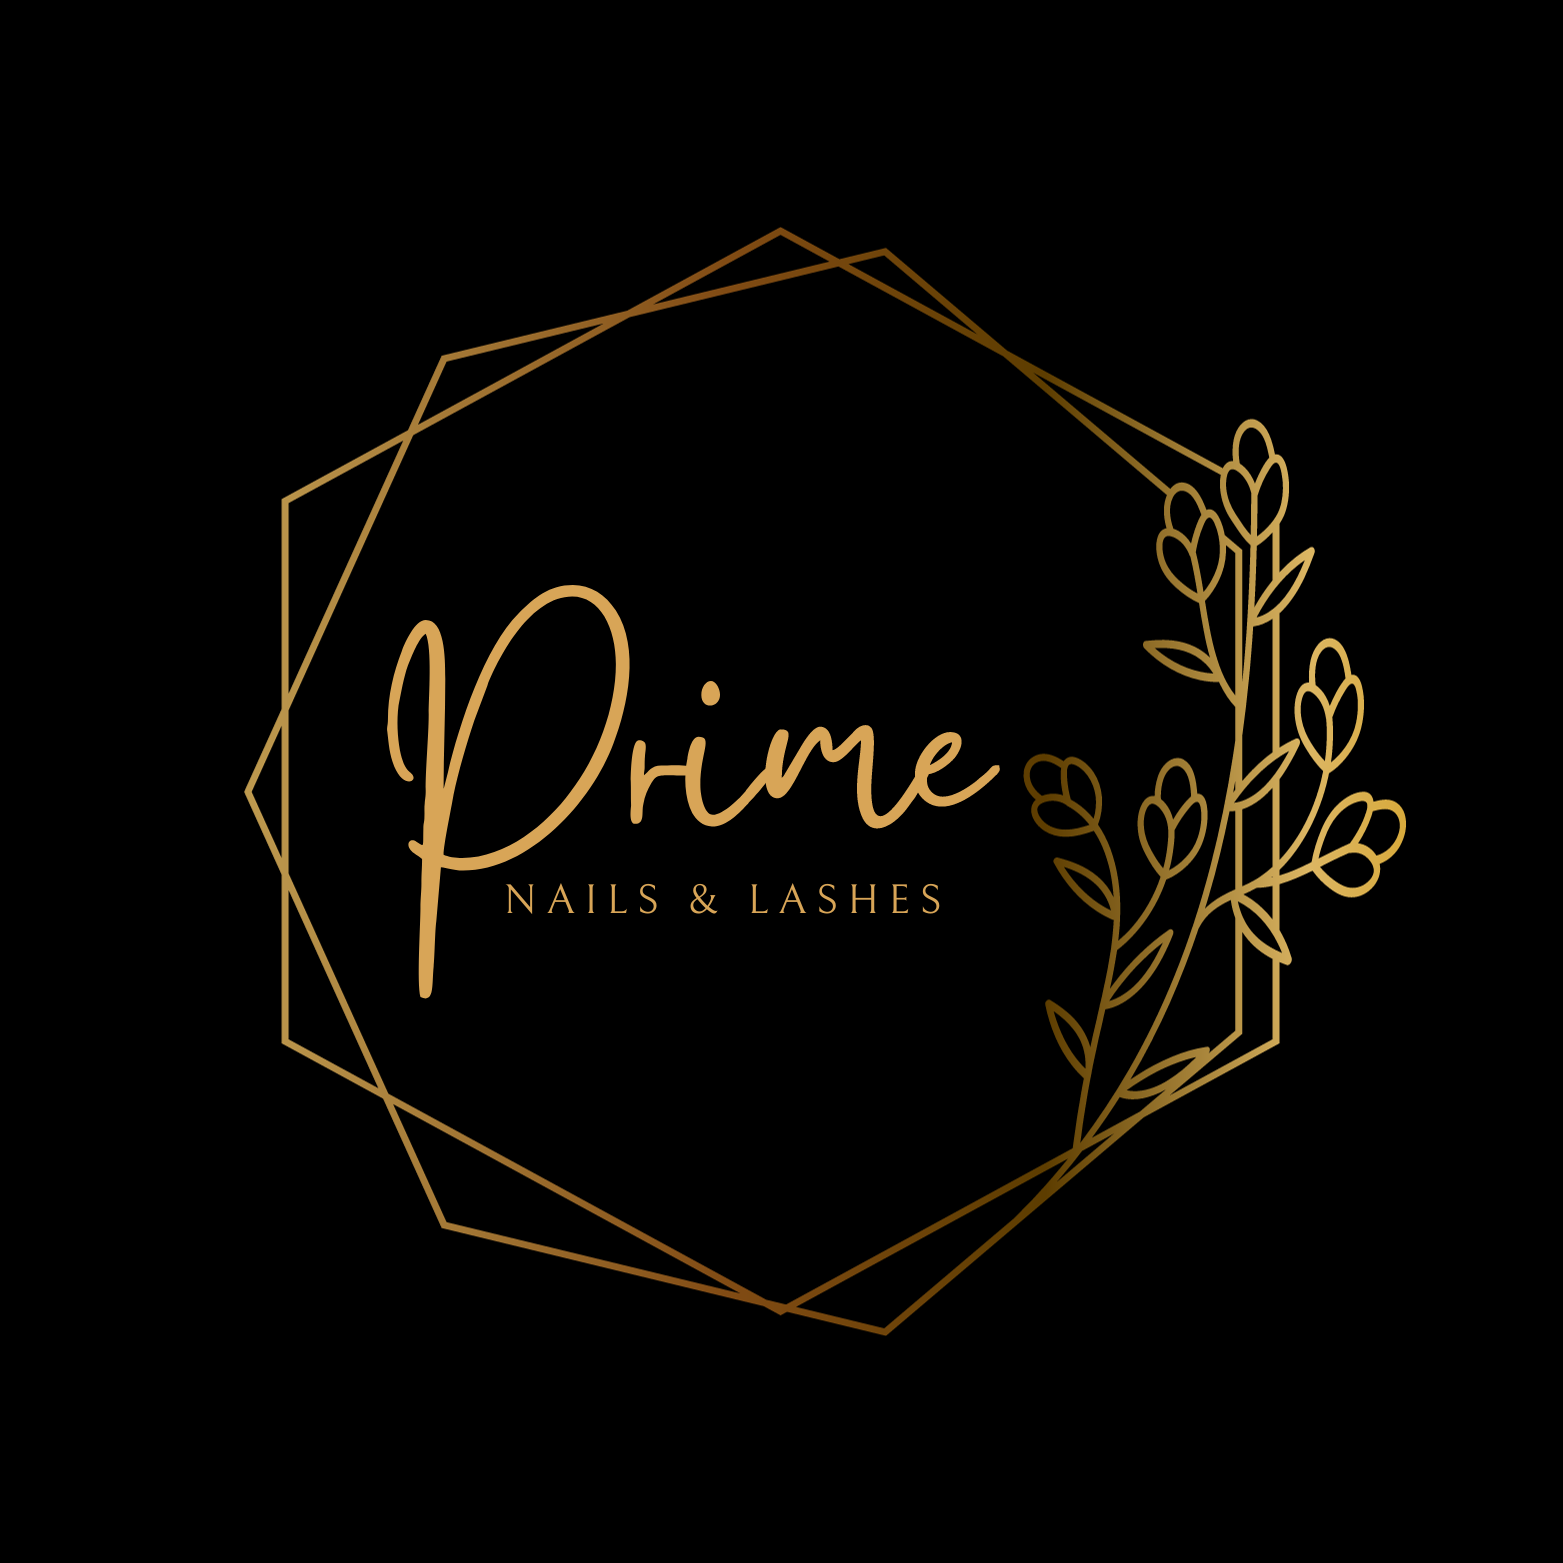 Prime Nail Studio Salon - Full Pricelist, Phone Number - 700 Grand St -  Best Nail Services and Nail Places in South Side and Williamsburg | Snailz  the Brooklyn Nail Salon Booking App